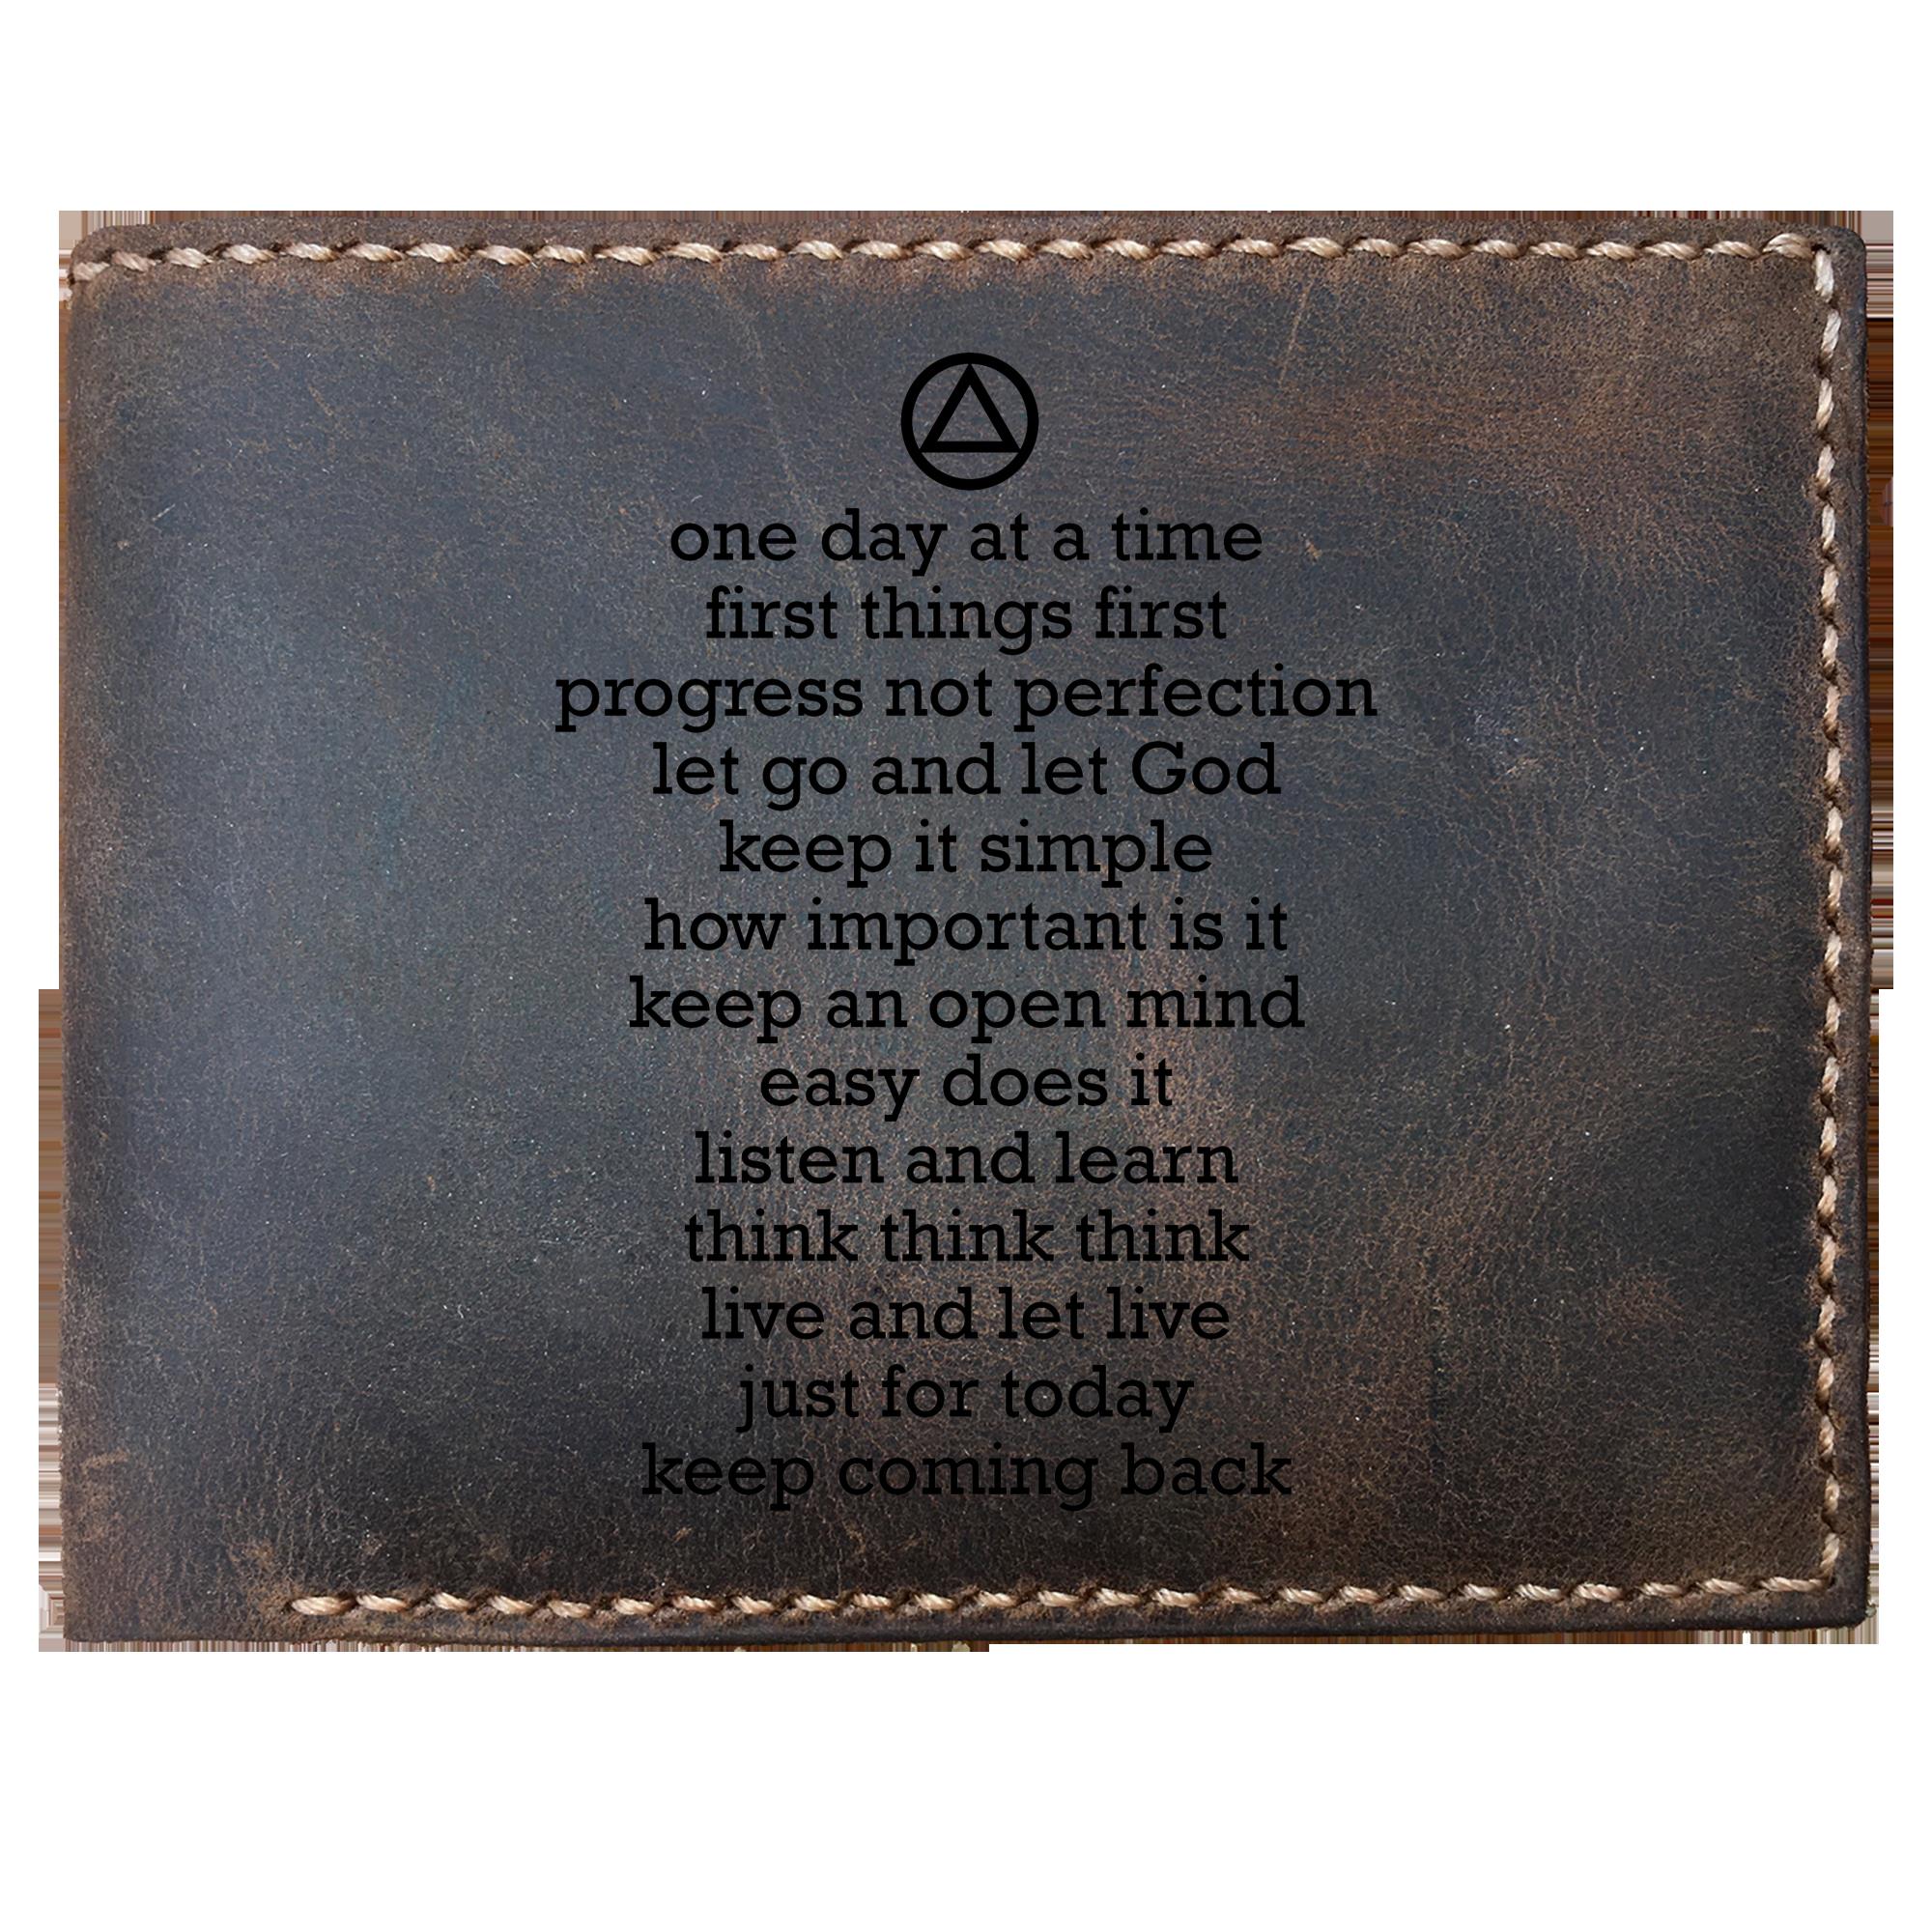 Skitongifts Funny Custom Laser Engraved Bifold Leather Wallet For Men, Aa Slogans Alcoholics Anonymous Recovery Sobriety